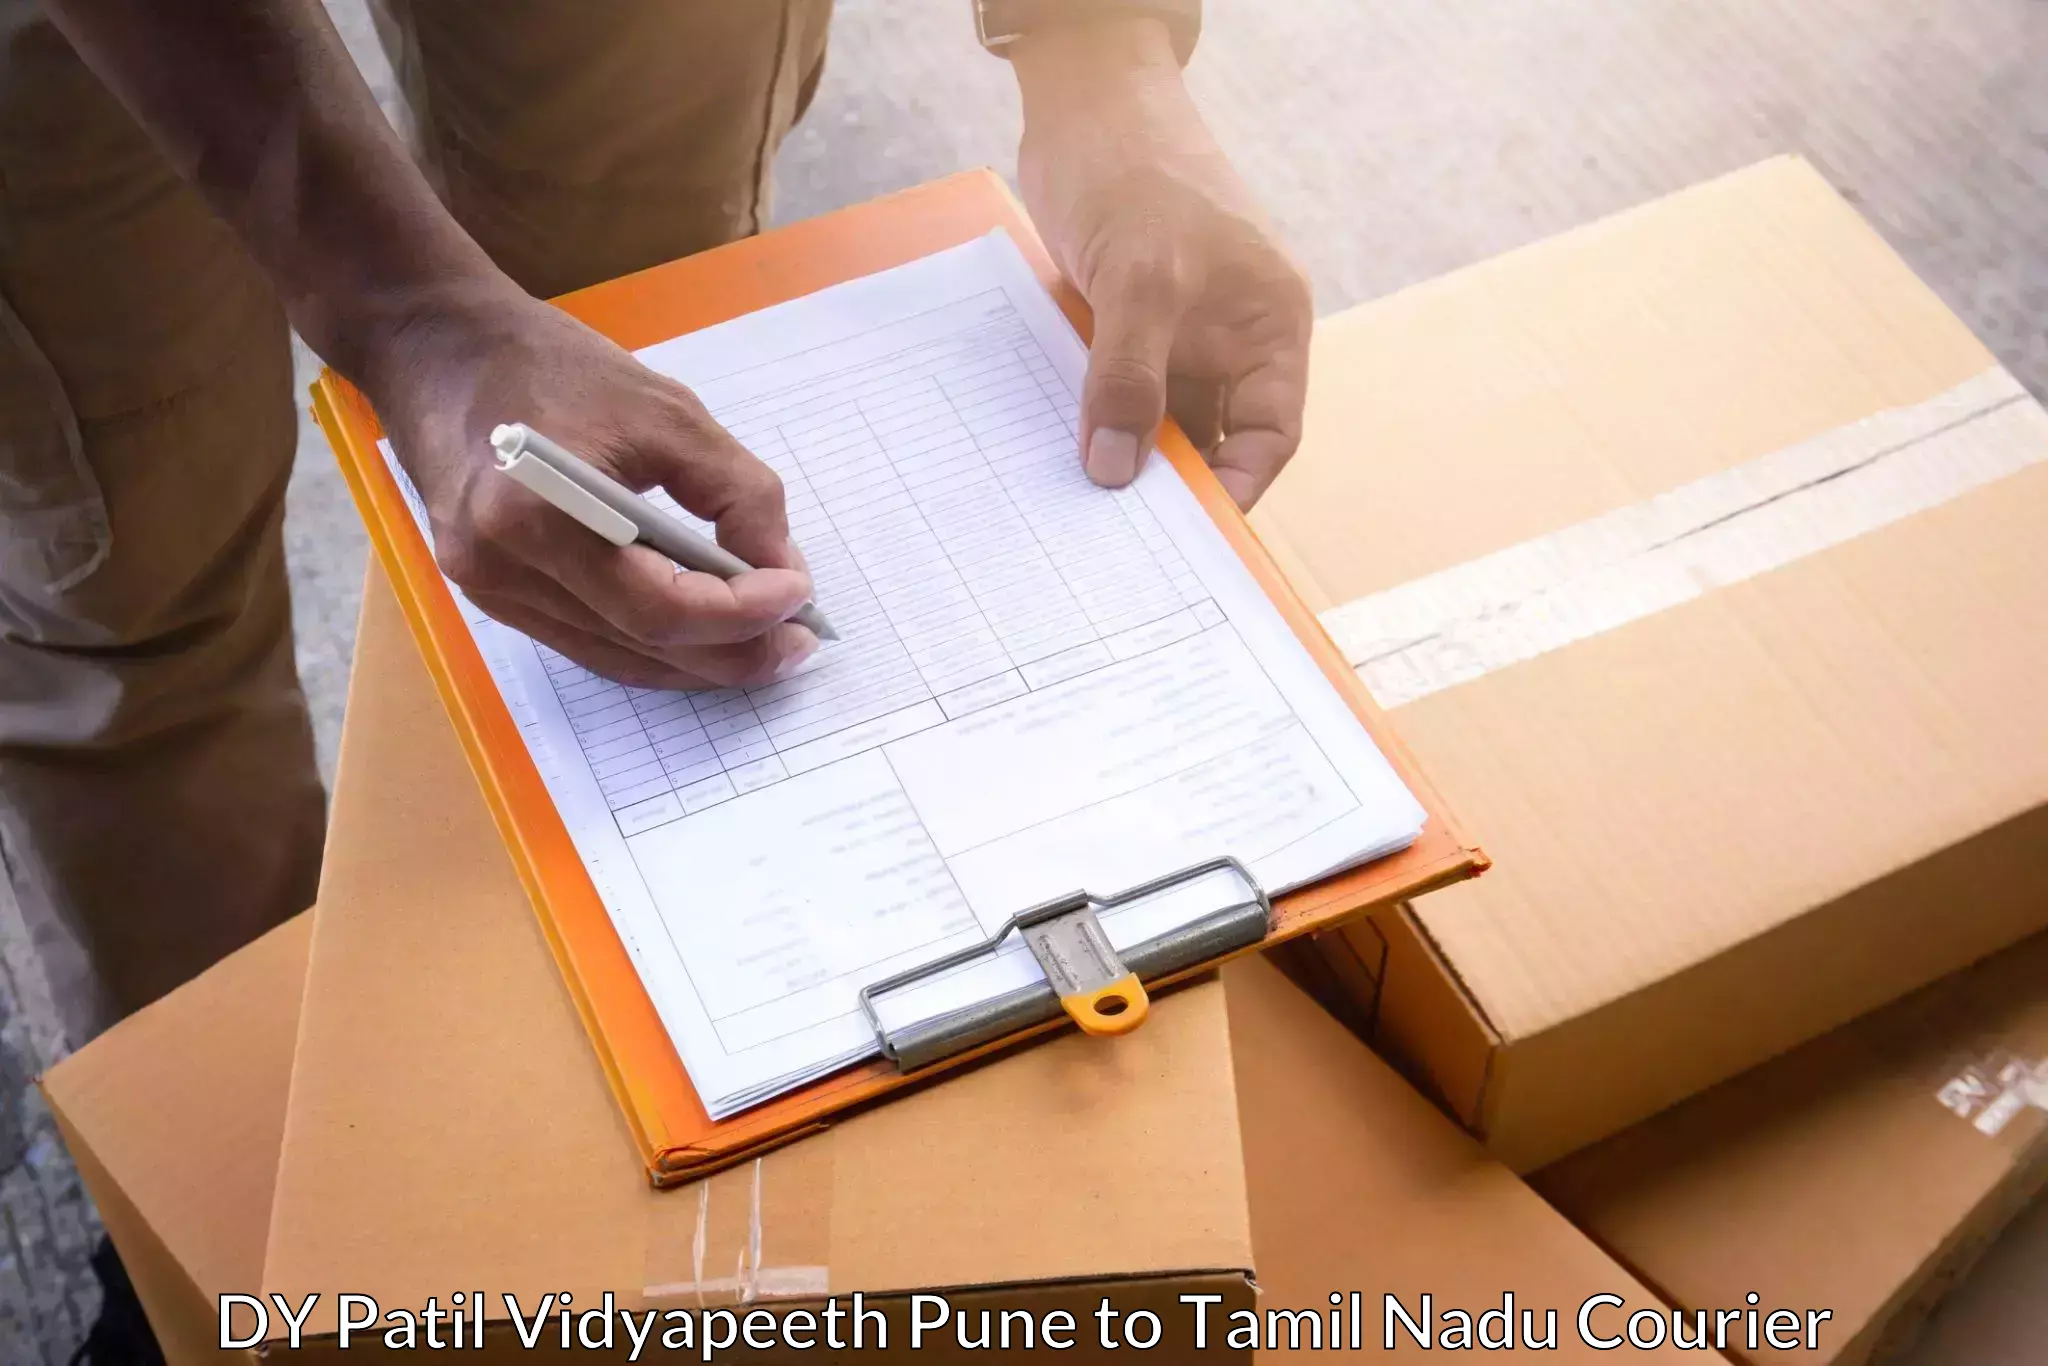 Comprehensive shipping services DY Patil Vidyapeeth Pune to Chennai Port